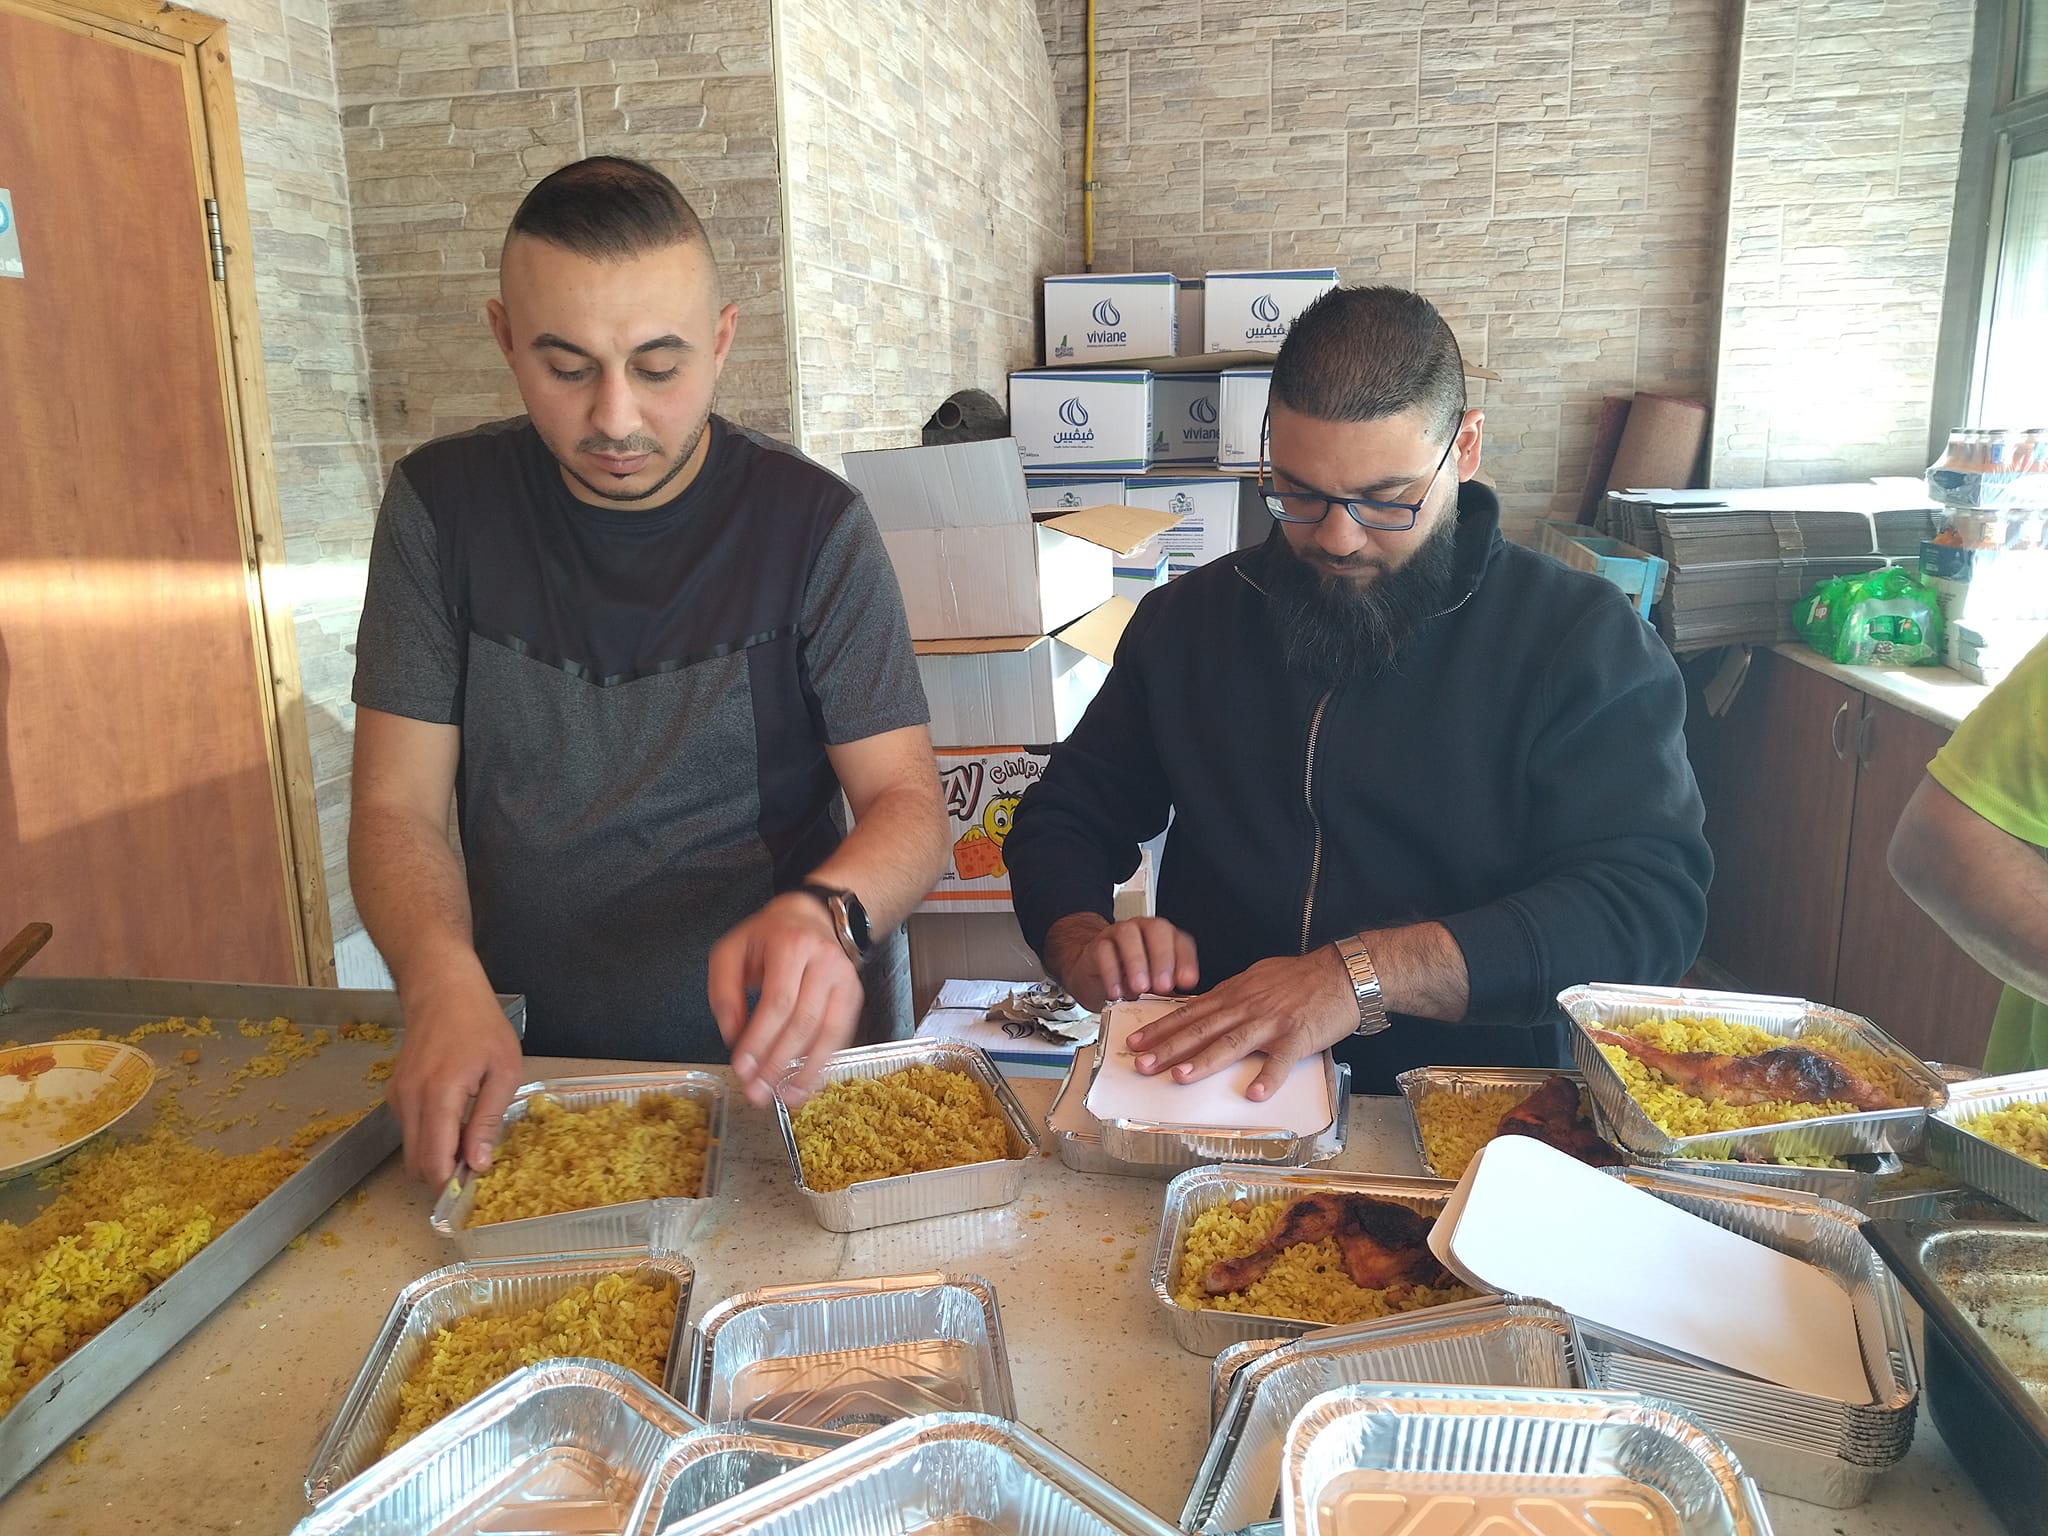 Feeding orphaned children project in Palestine